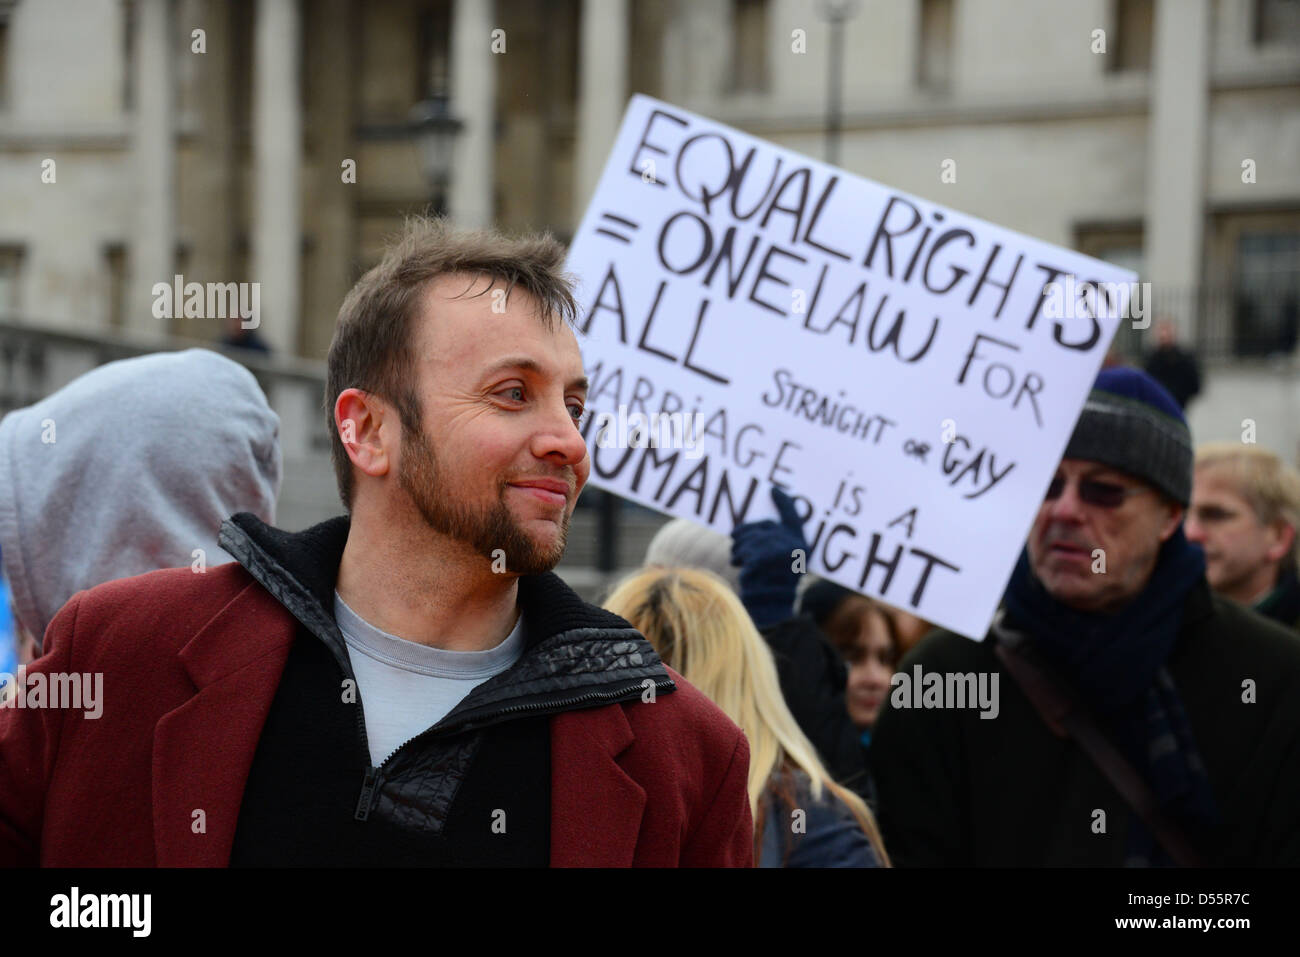 A protester holding a placard written 'Equal Rights = One Law for all, Straight or Gay. Marriage is a human right', in Trafalgar Stock Photo